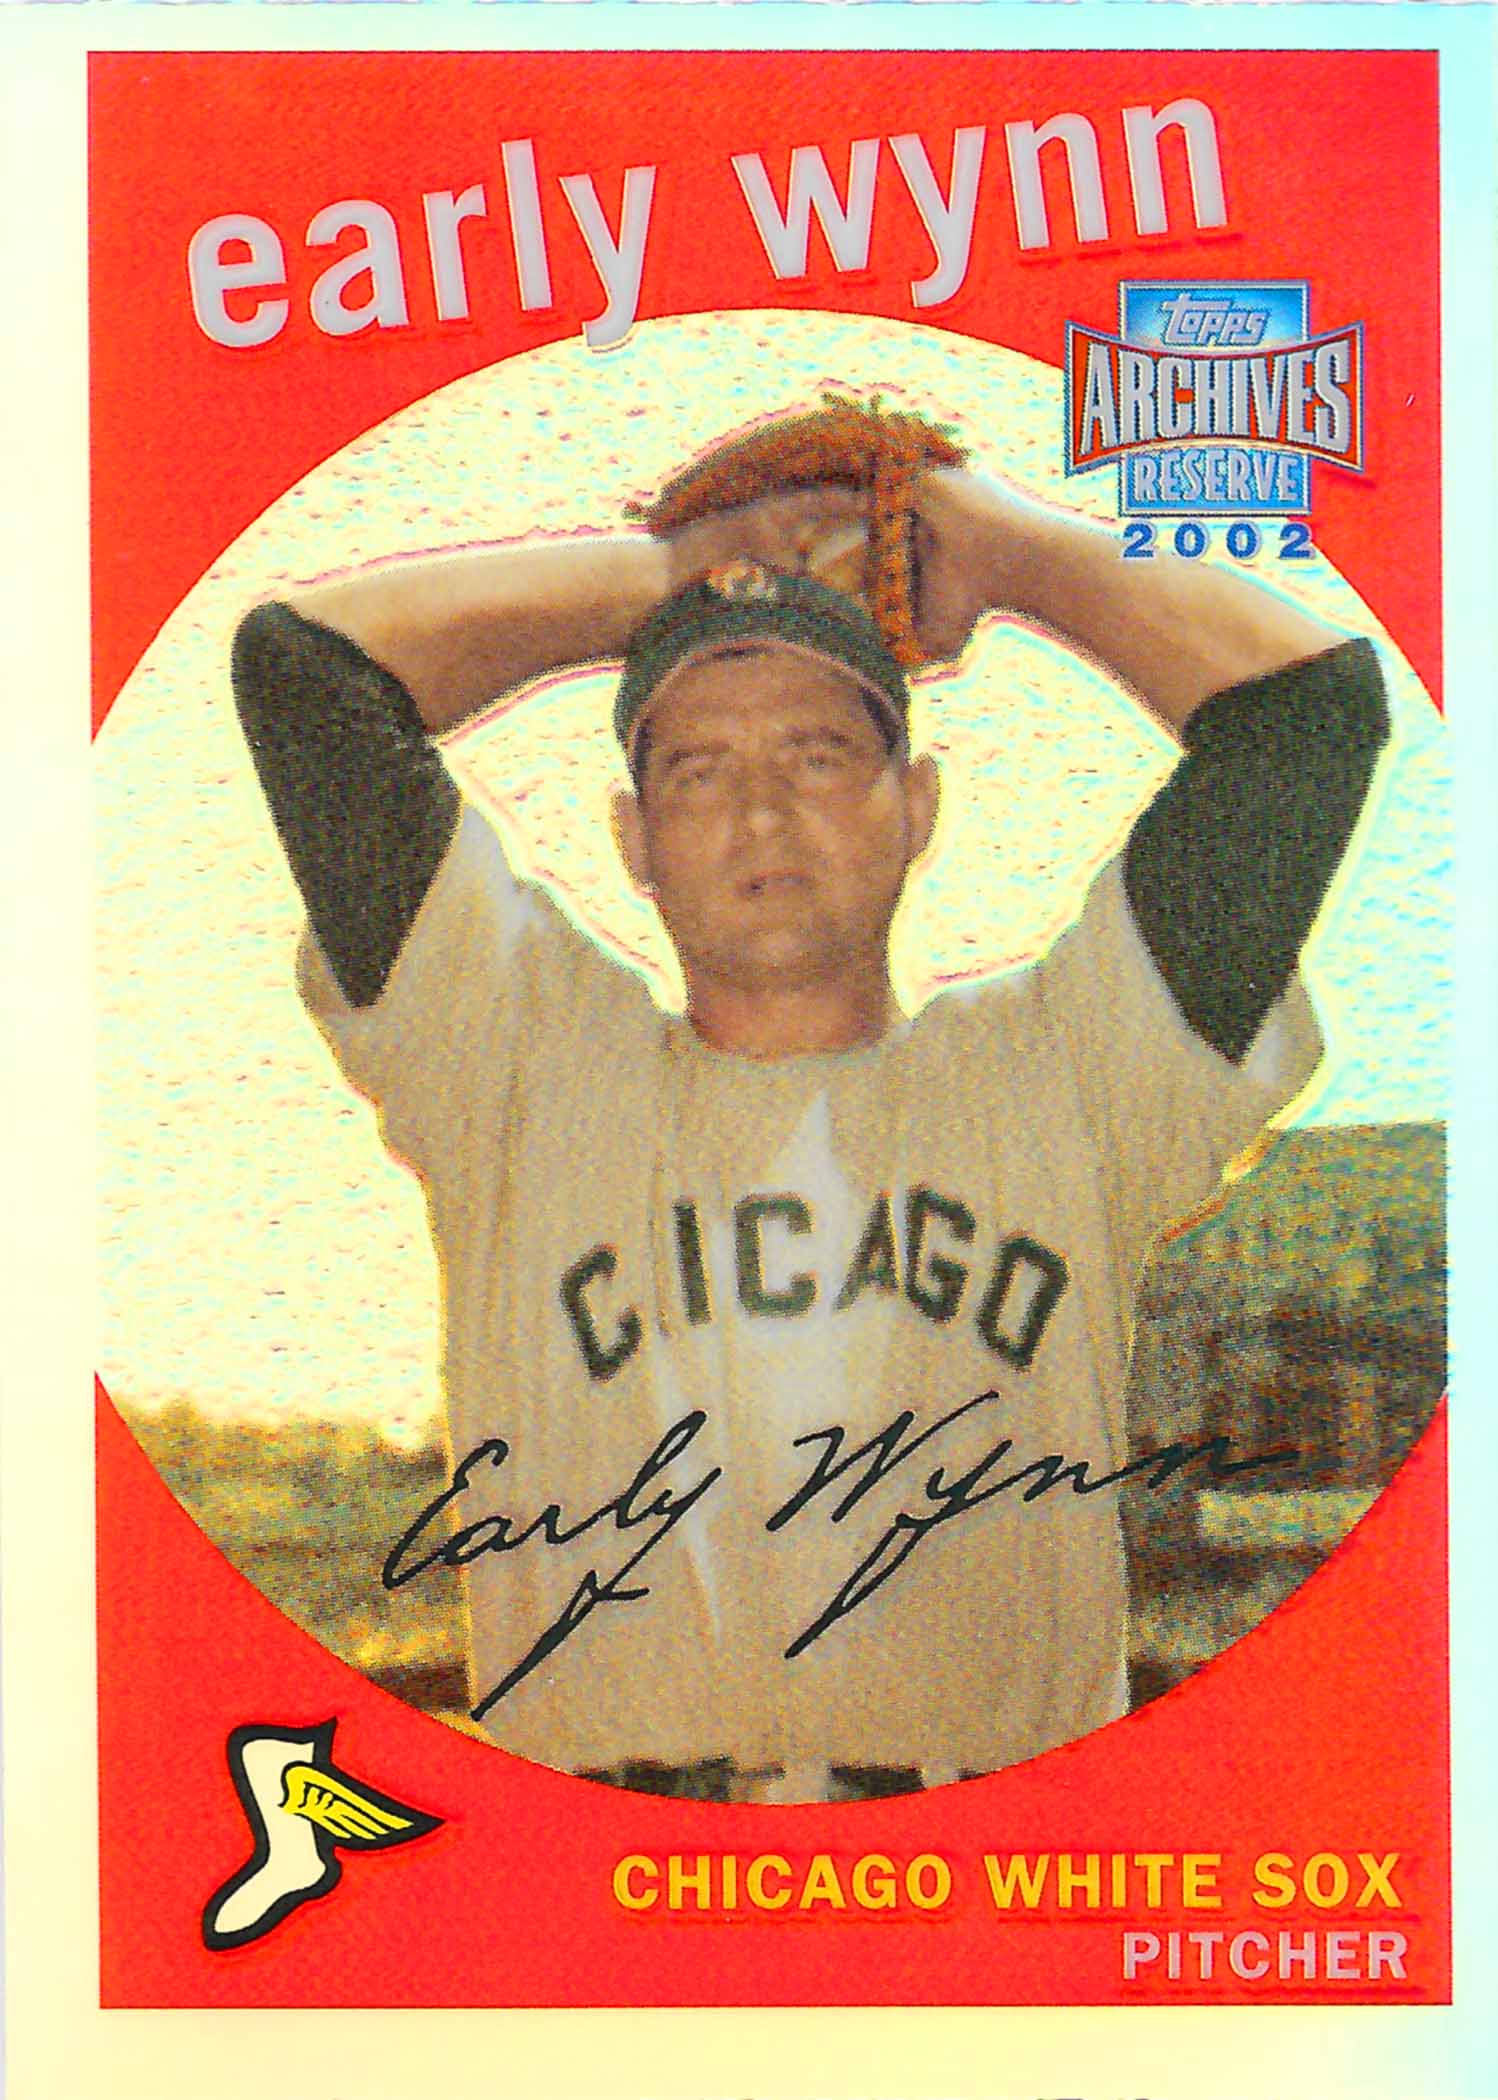 2002 Topps Archives Reserve